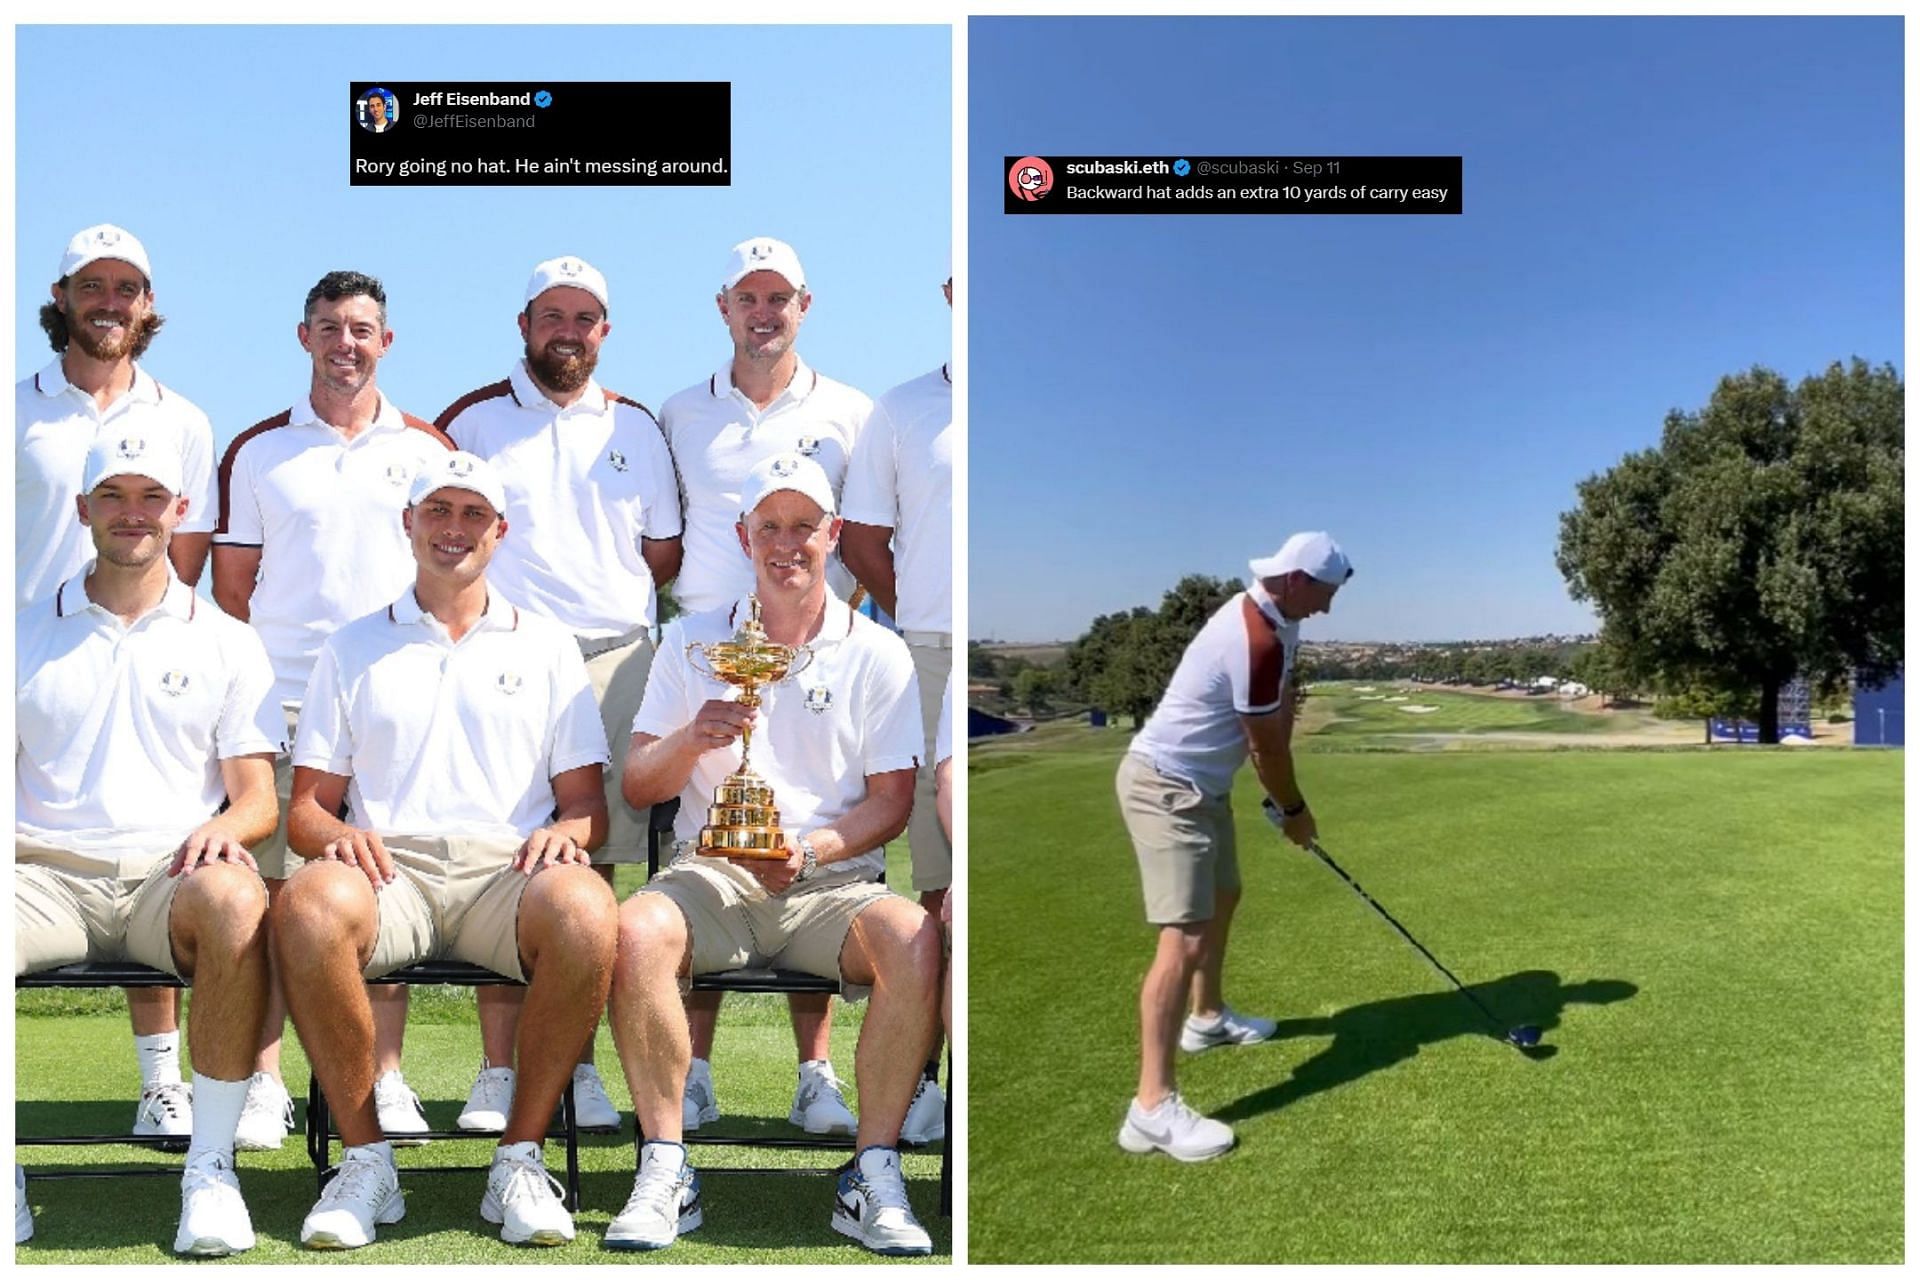 McIlroy and the other members of the European squad were present at the Marco Simone Golf Club ahead of the Ryder Cup (Image via Twitter.com/RyderCupEurope